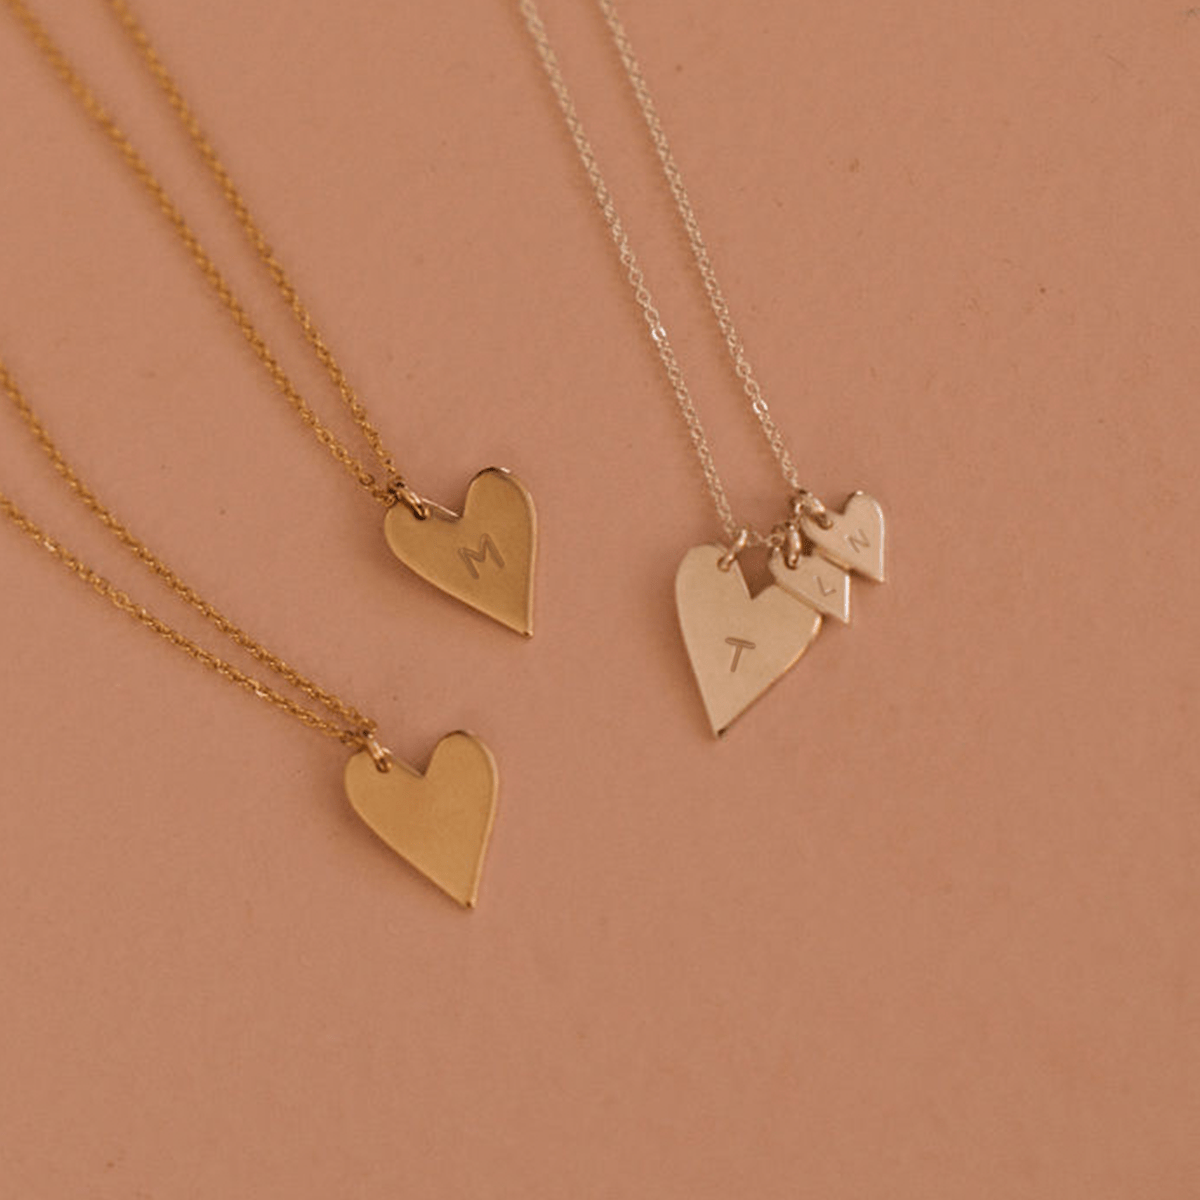 Sweetheart Initial Necklace Rose Gold Filled / 16-18